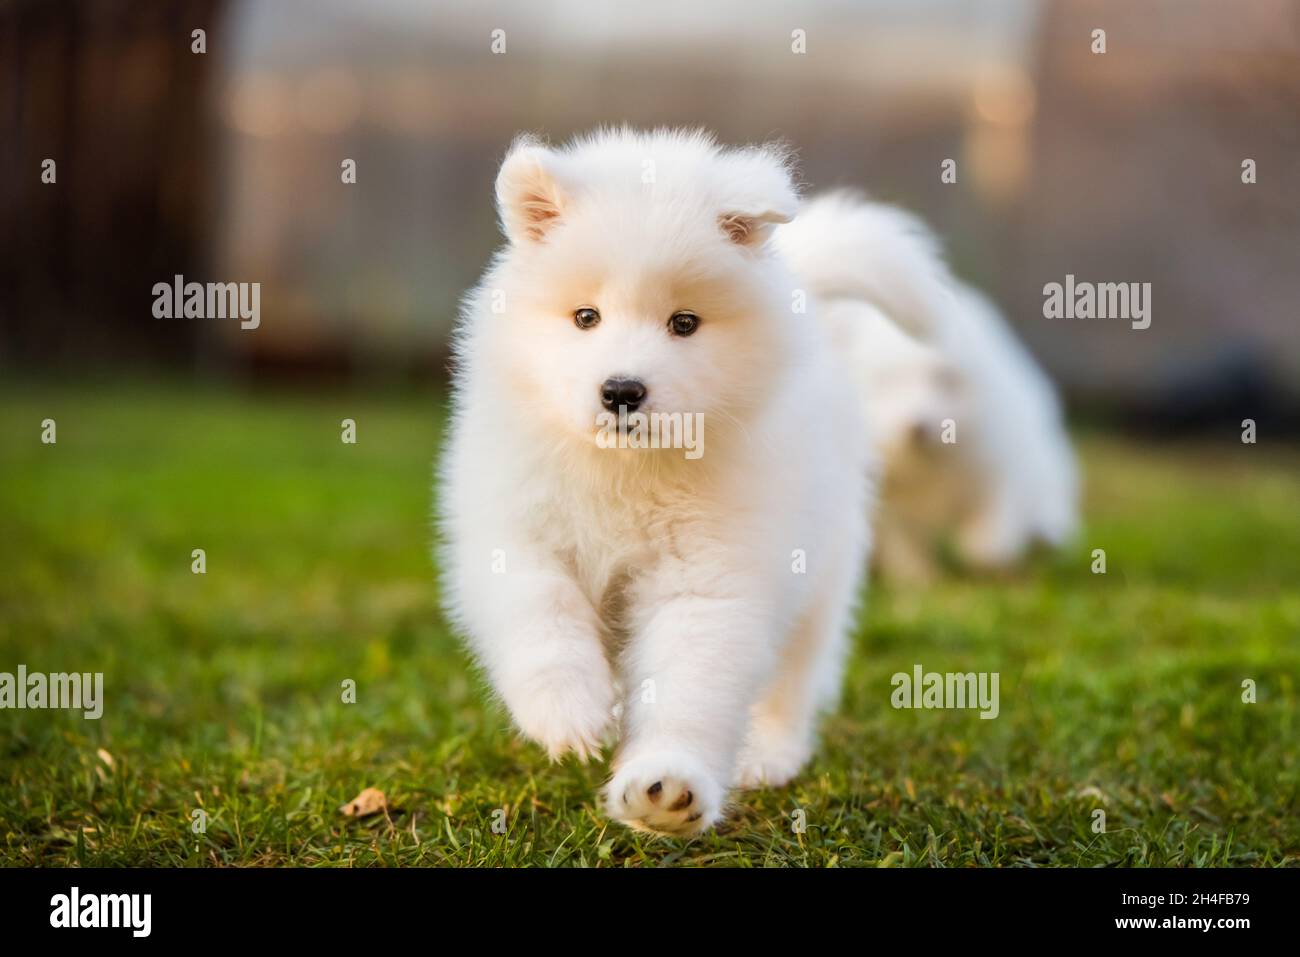 Adorable samoyed puppy running in motion on the lawn Stock Photo